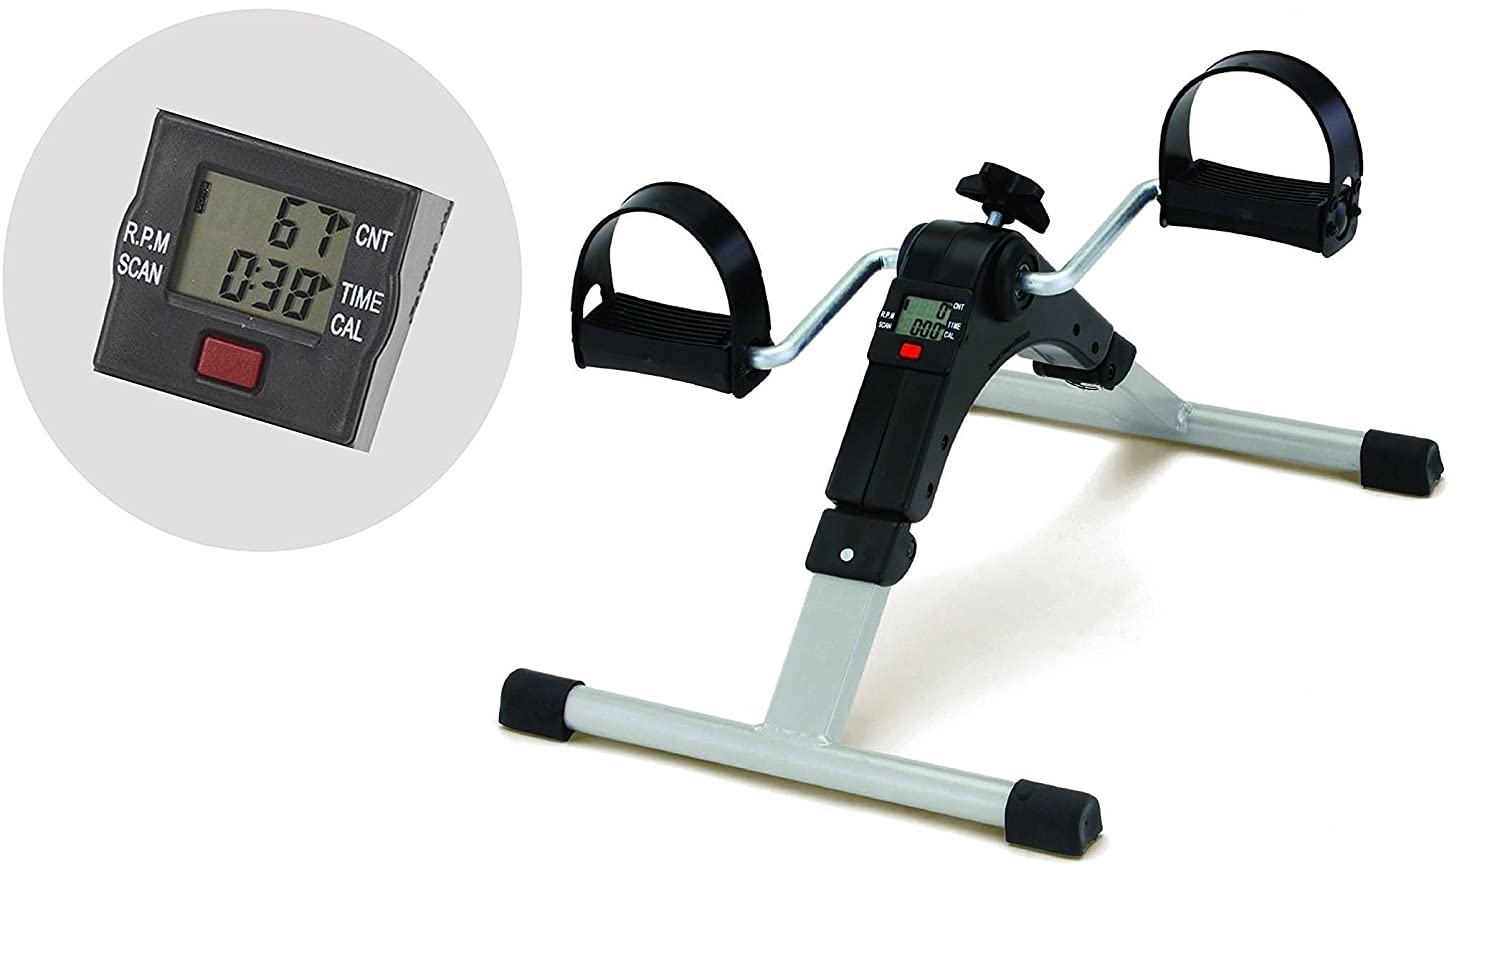 Mini Pedal Exercise Cycle or Fitness Bike (With Digital Display )